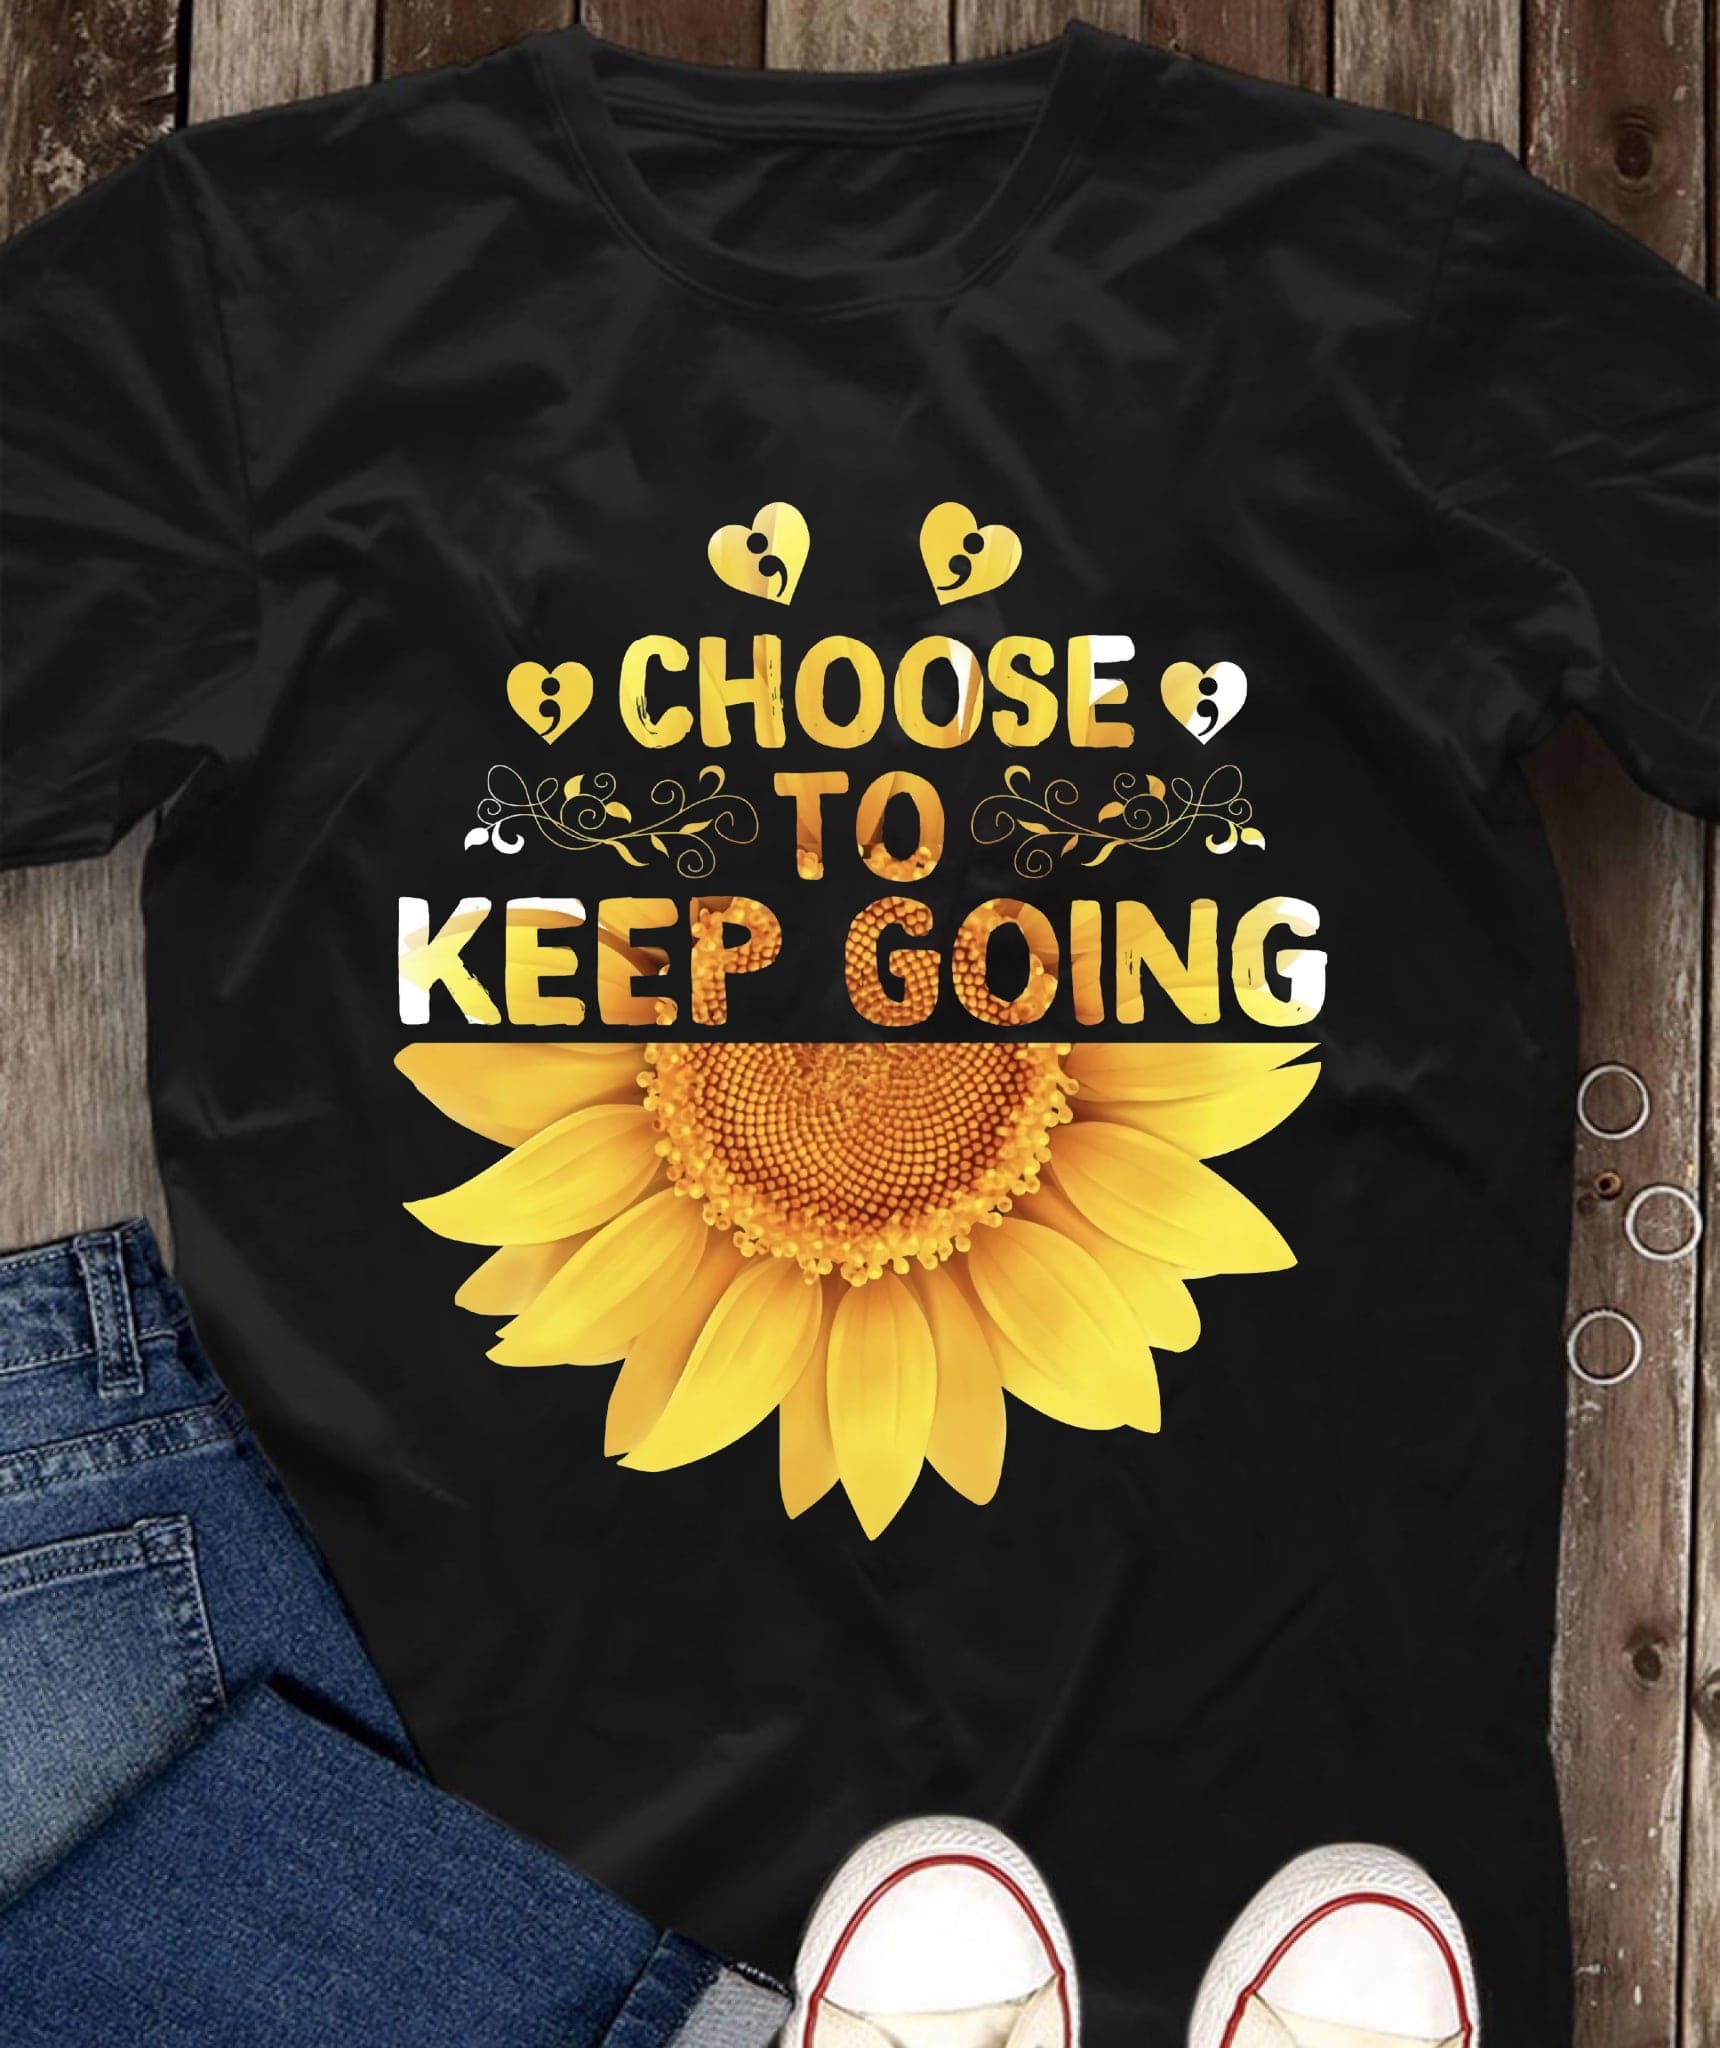 Choose to keep going - Sunflower graphic T-shirt, suicide prevention awareness